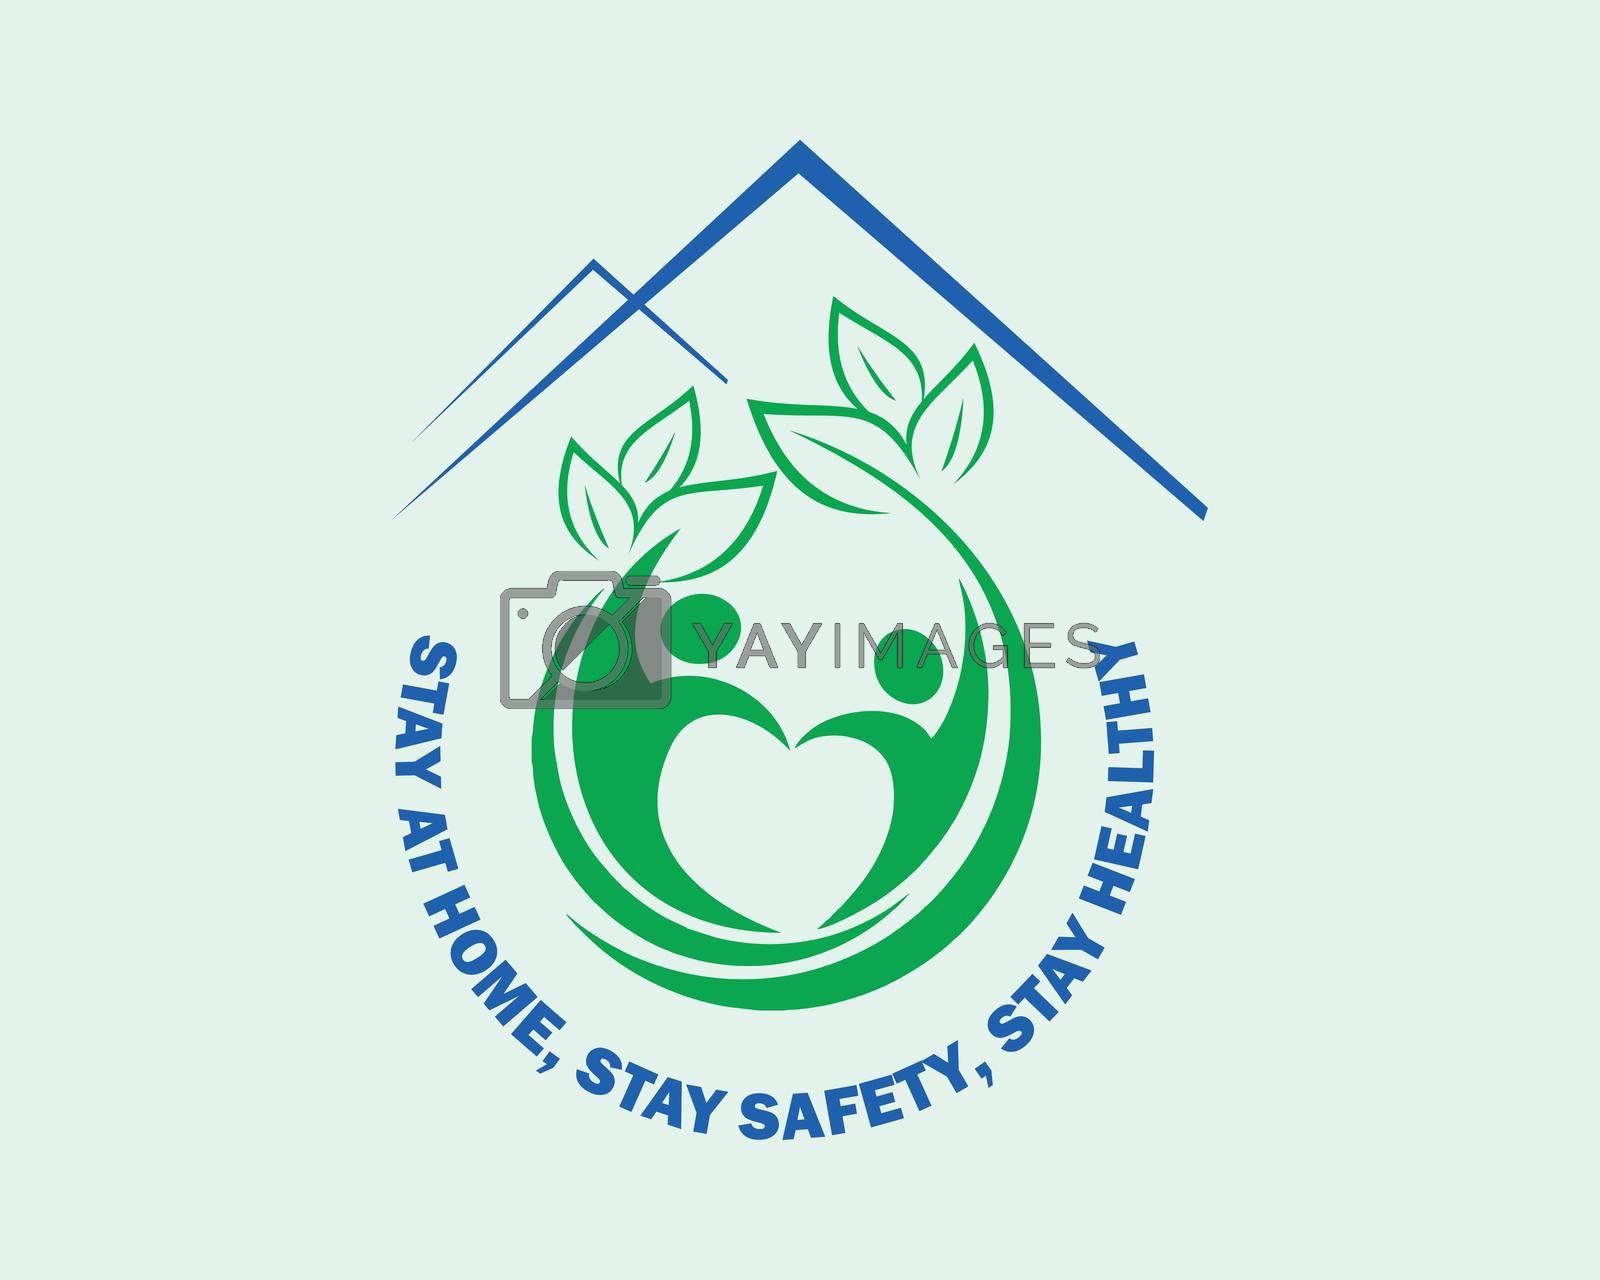 Royalty free image of Stay at home stay safety stay healthy  by Up2date